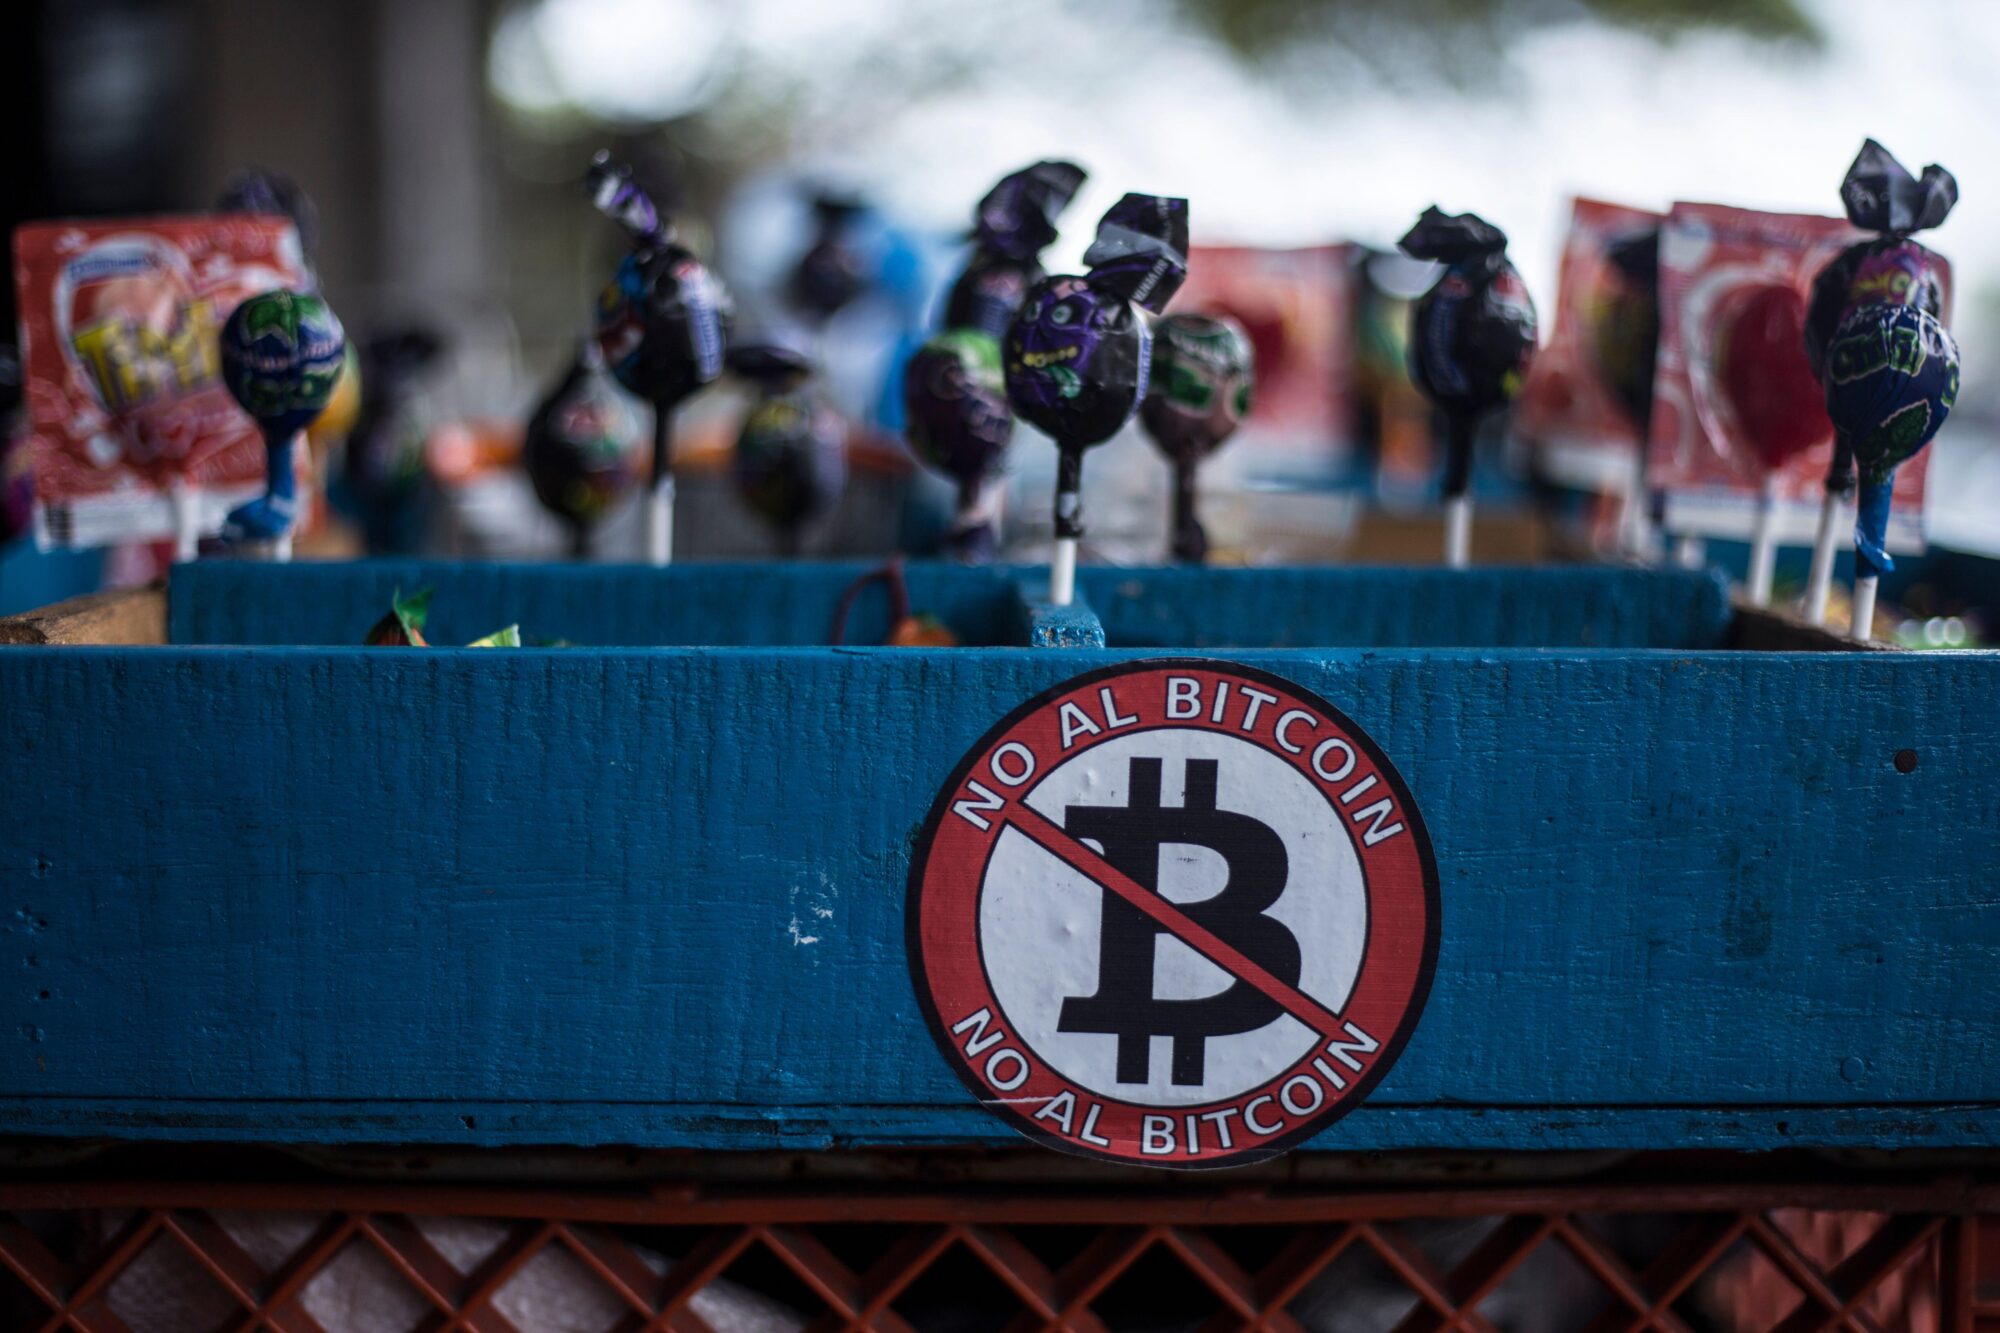 Candies in a market in El Salvador, in a container that says "No to Bitcoin".